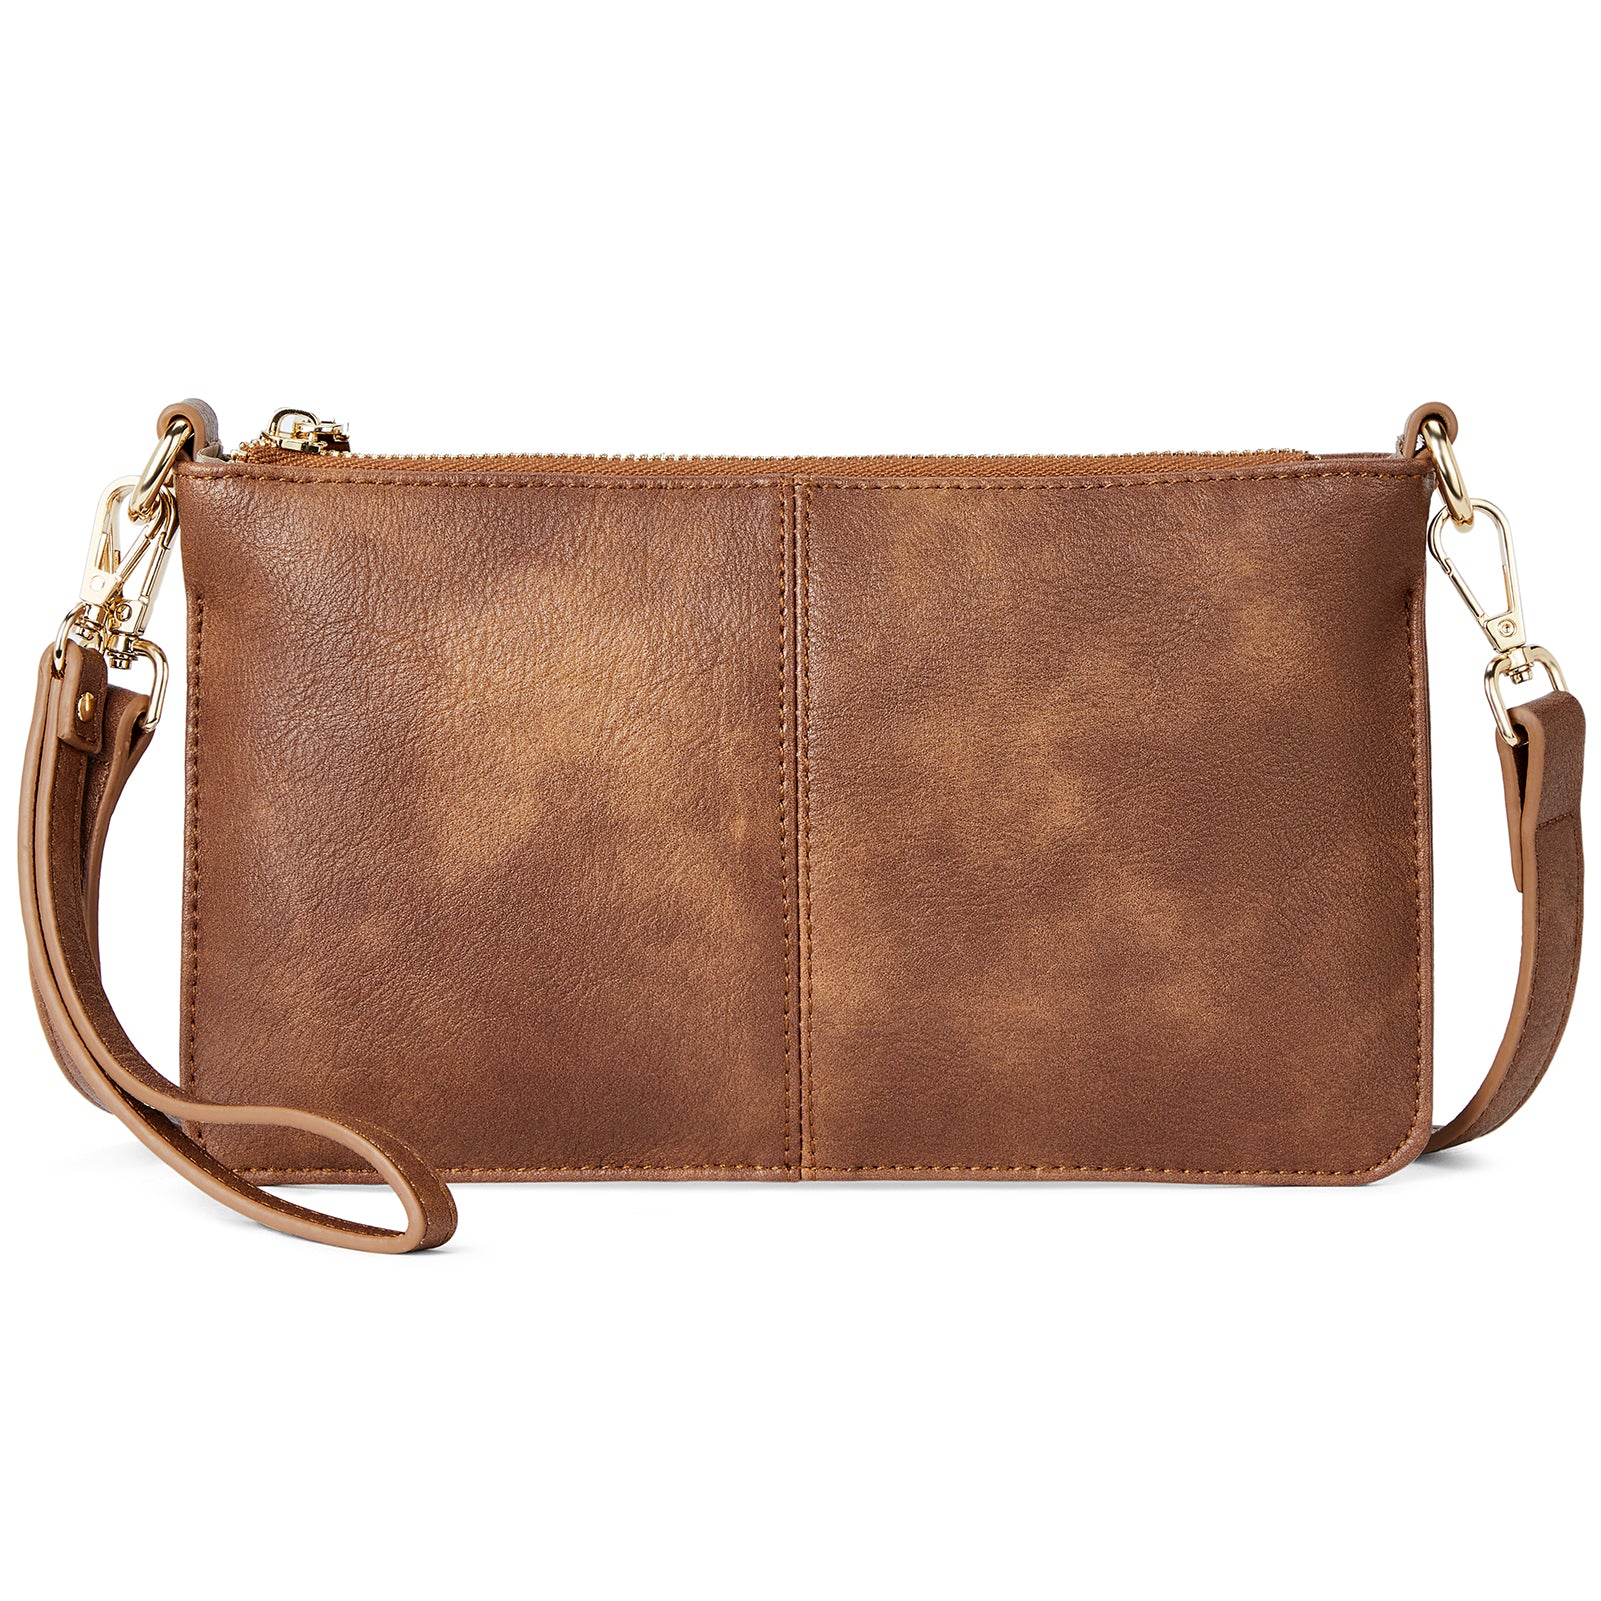 Vegan Leather Envelope Clutch Purse - Chic and Sustainable